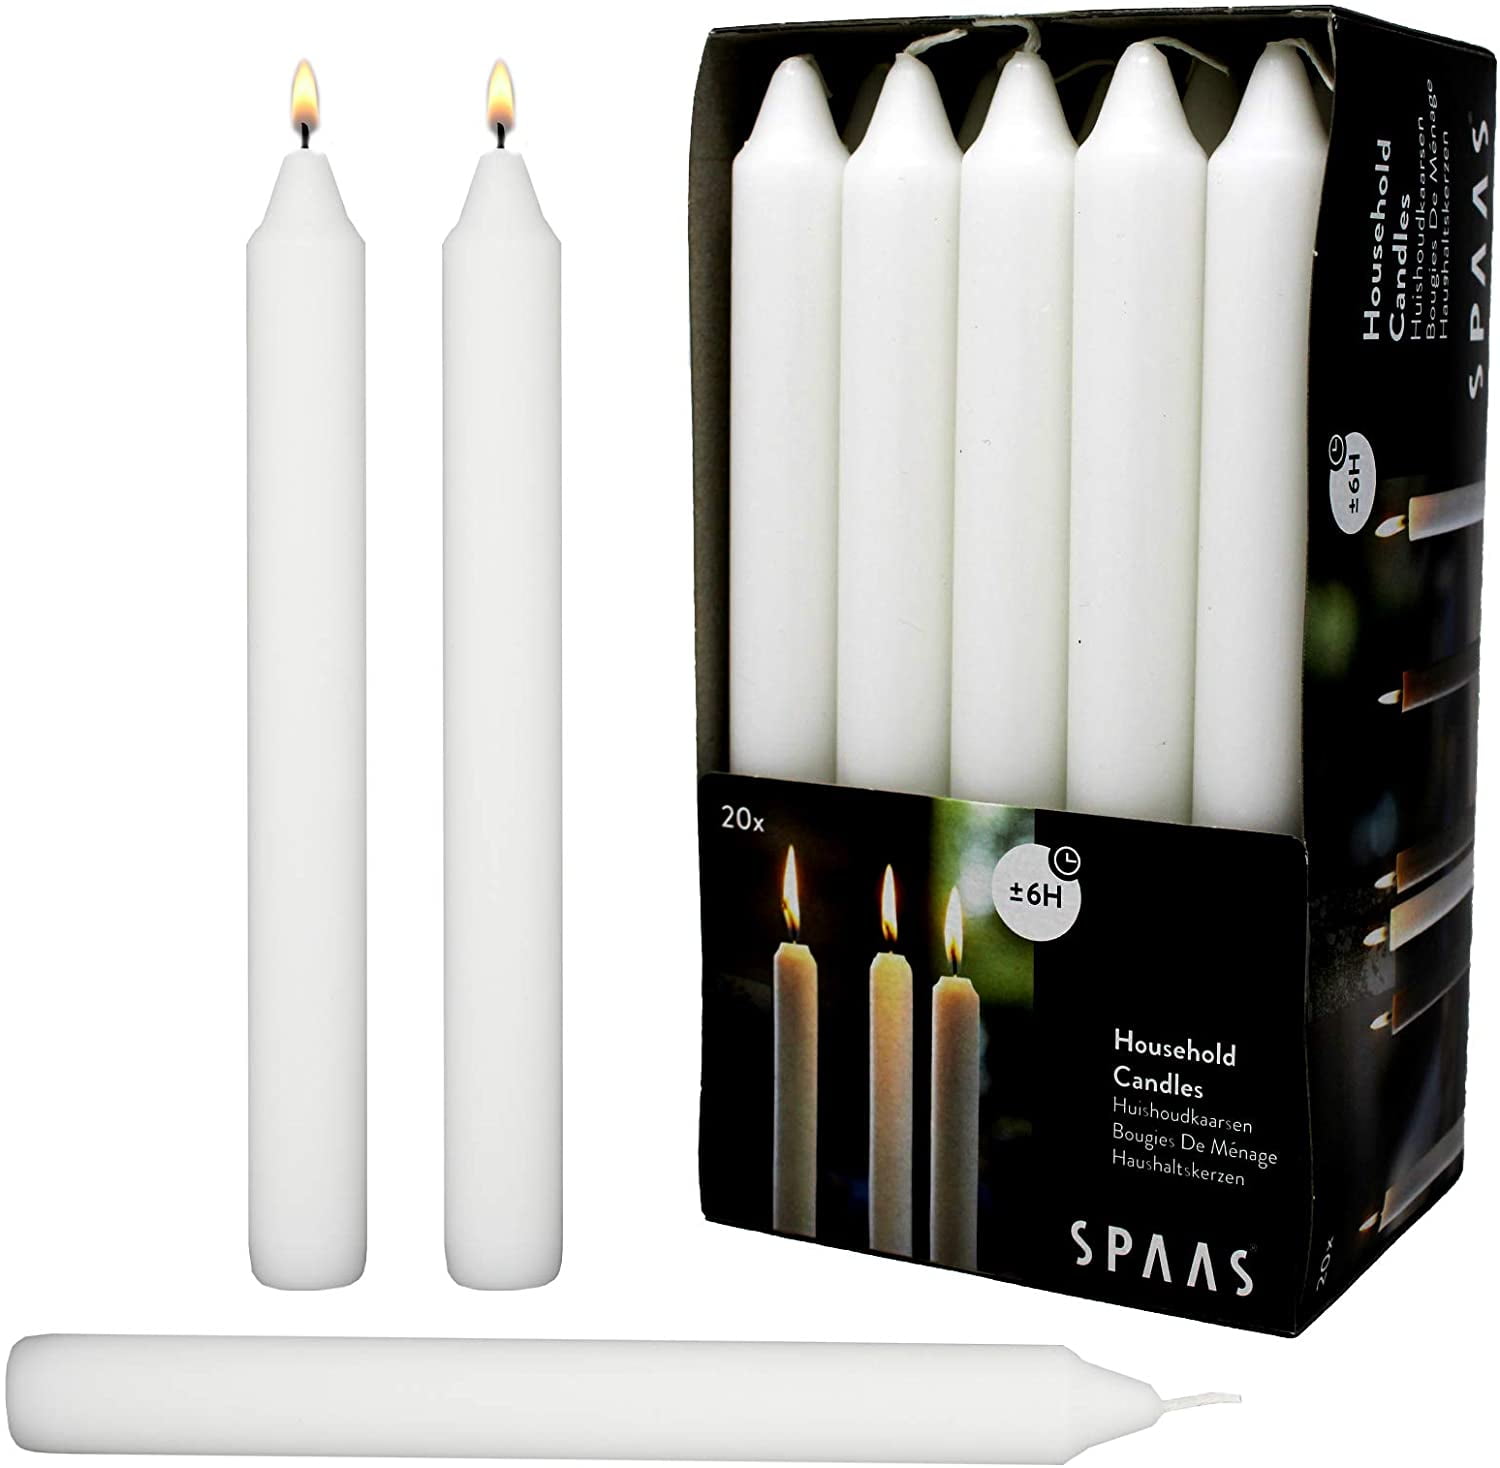 Ivory Dinner Like Taper Candles 10" Unscented 20 Pack Dripless Home Table Decor 